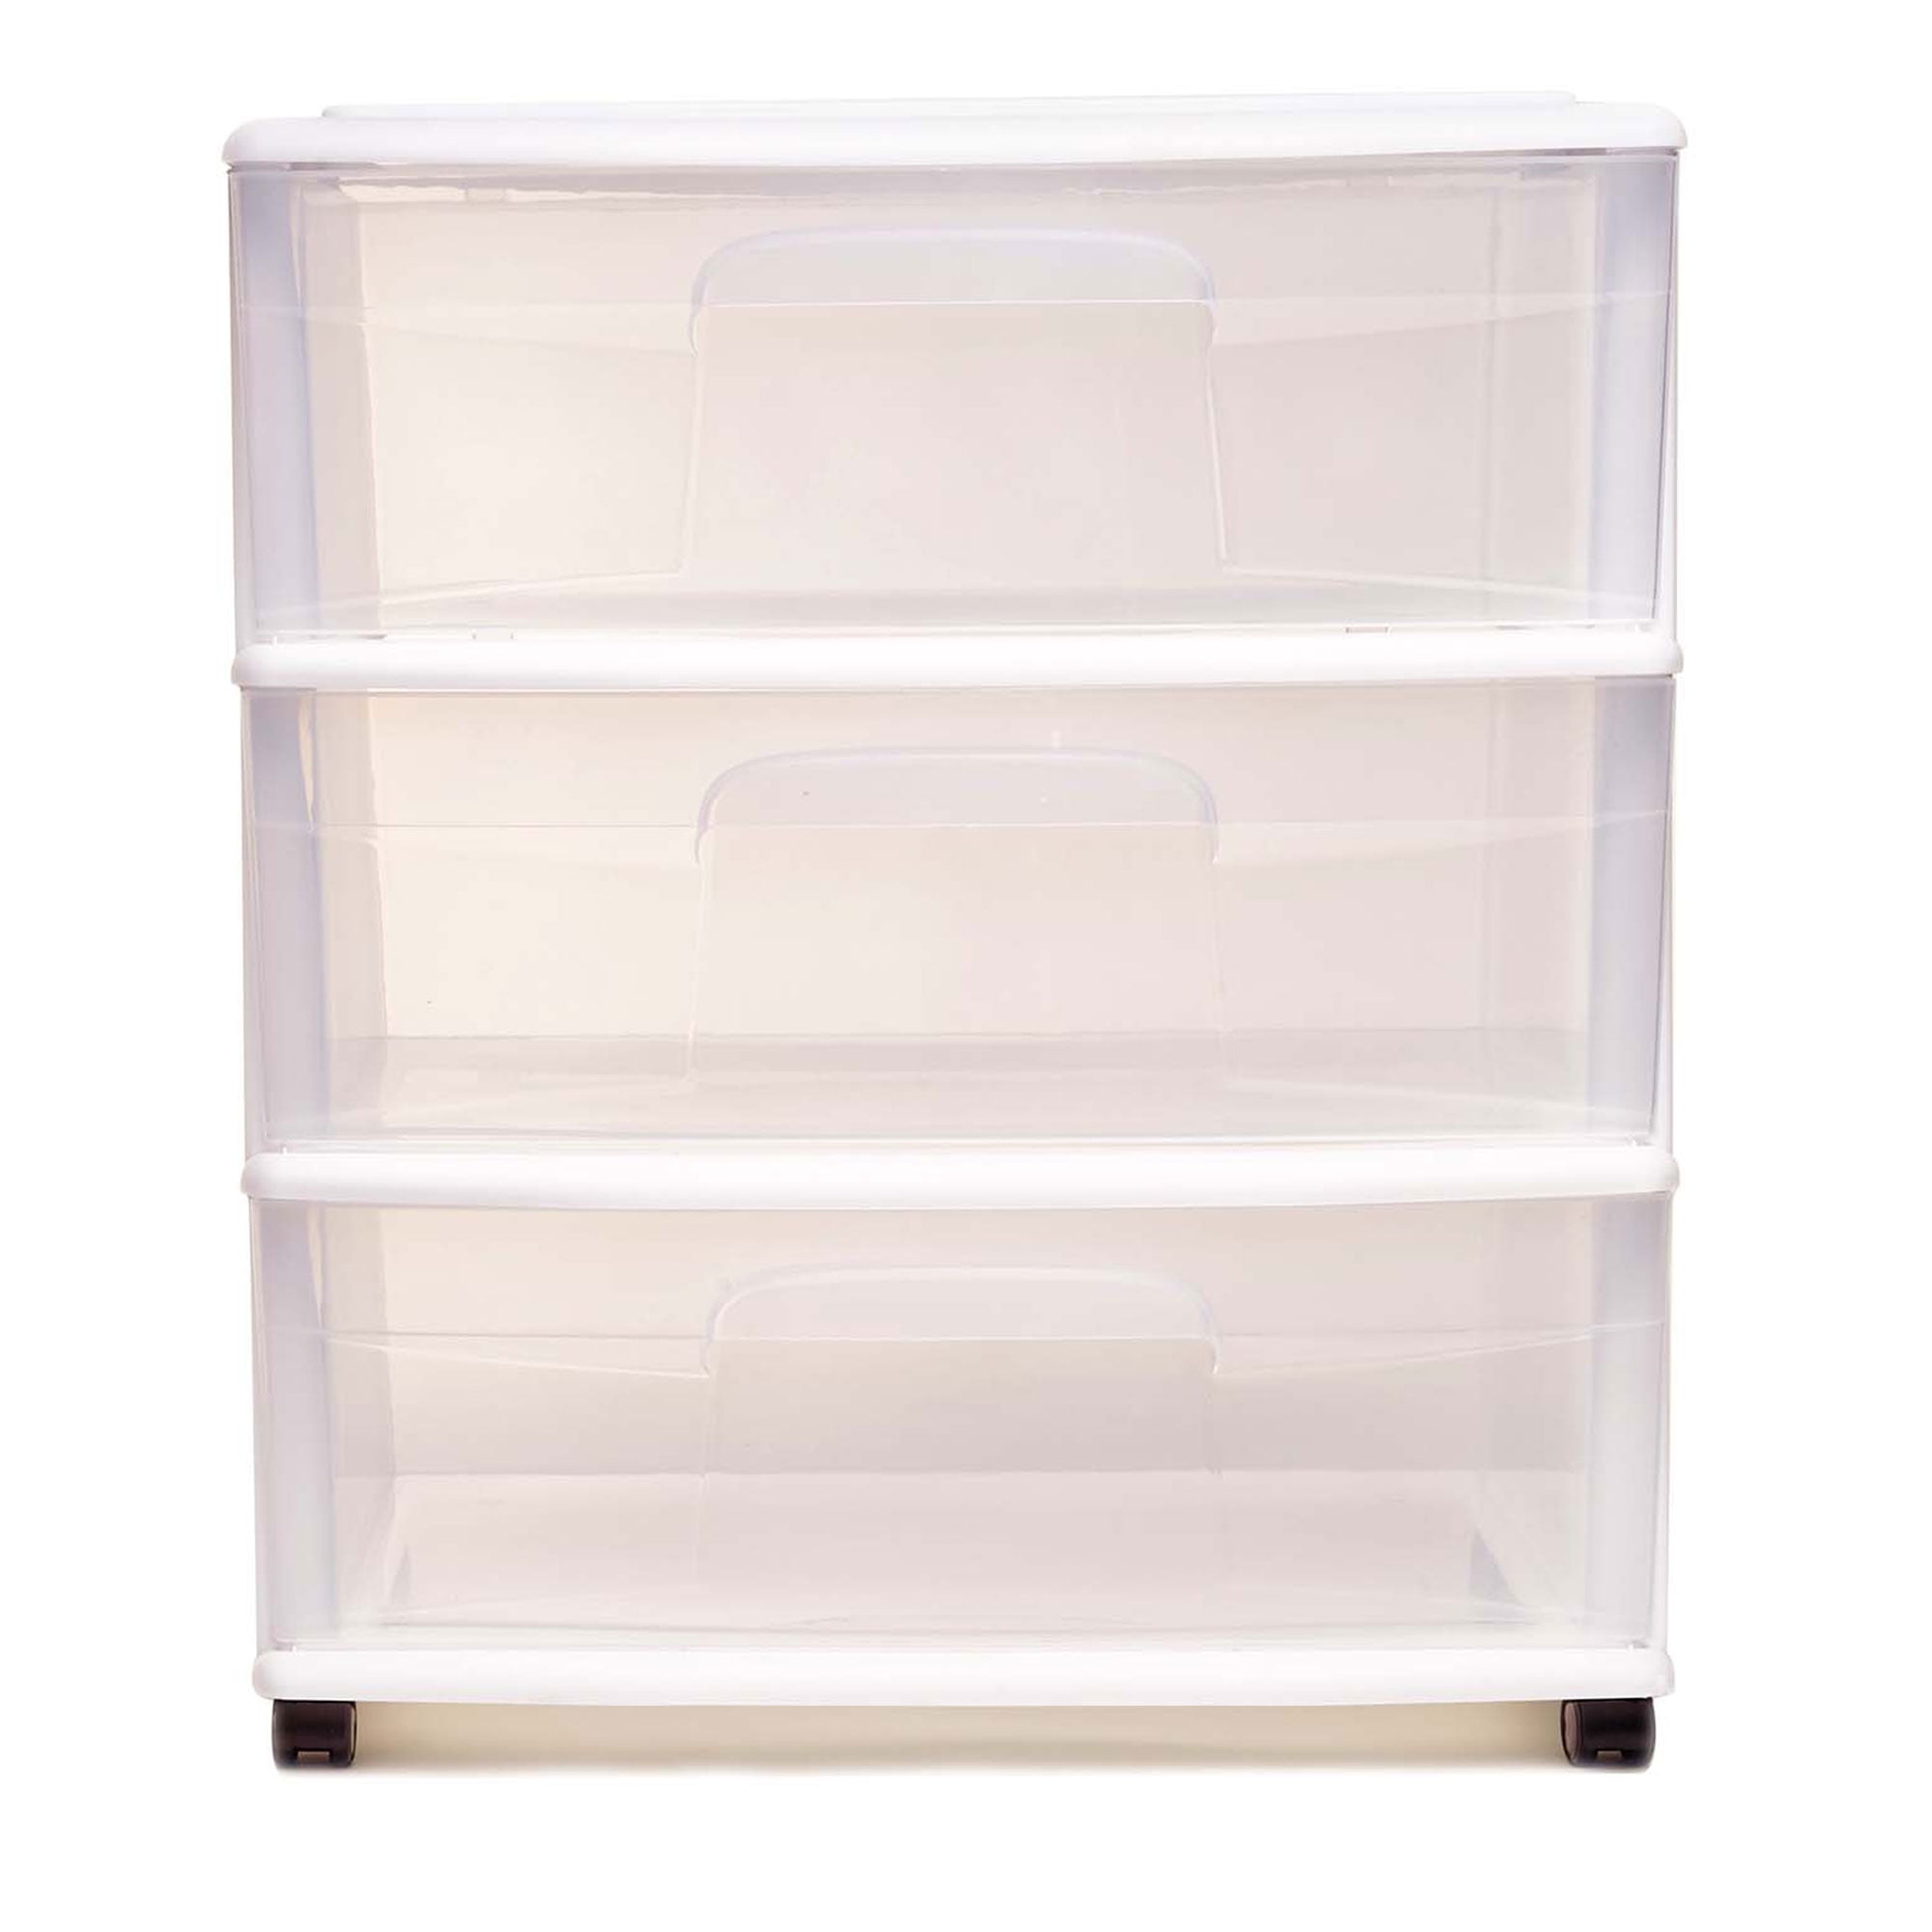 Homz Plastic 3 Drawer Medium Home Storage Container, Clear Drawers